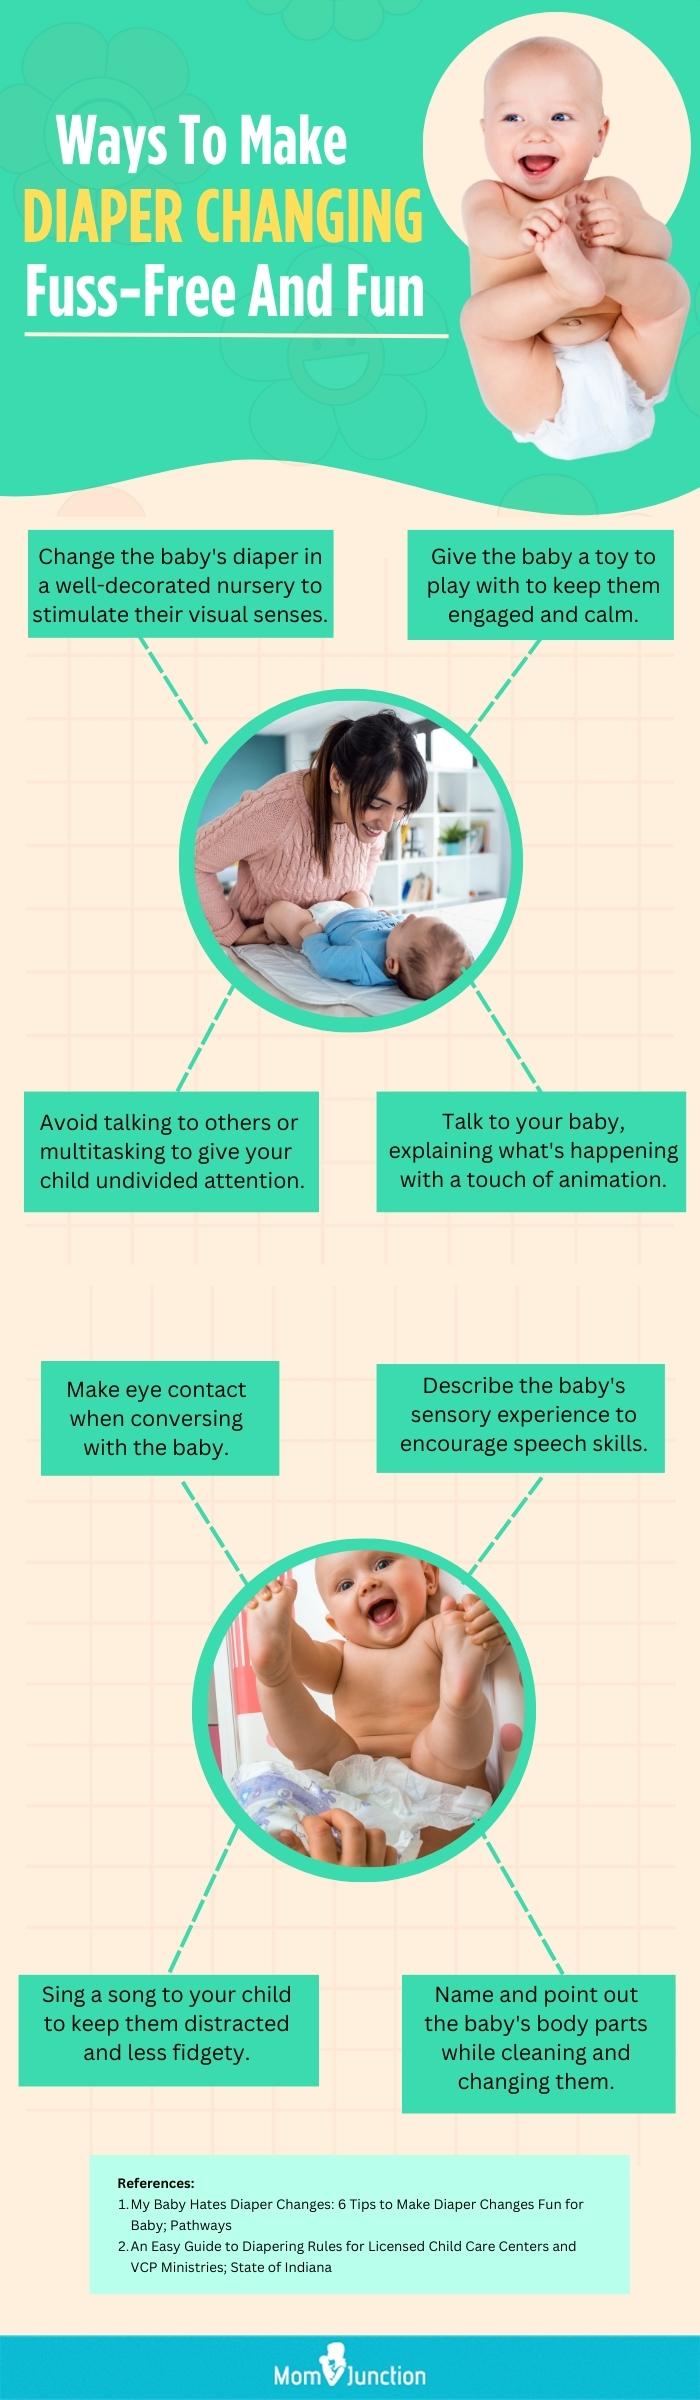 Ways To Make Diaper Changing Fuss-Free And Fun (infographic)